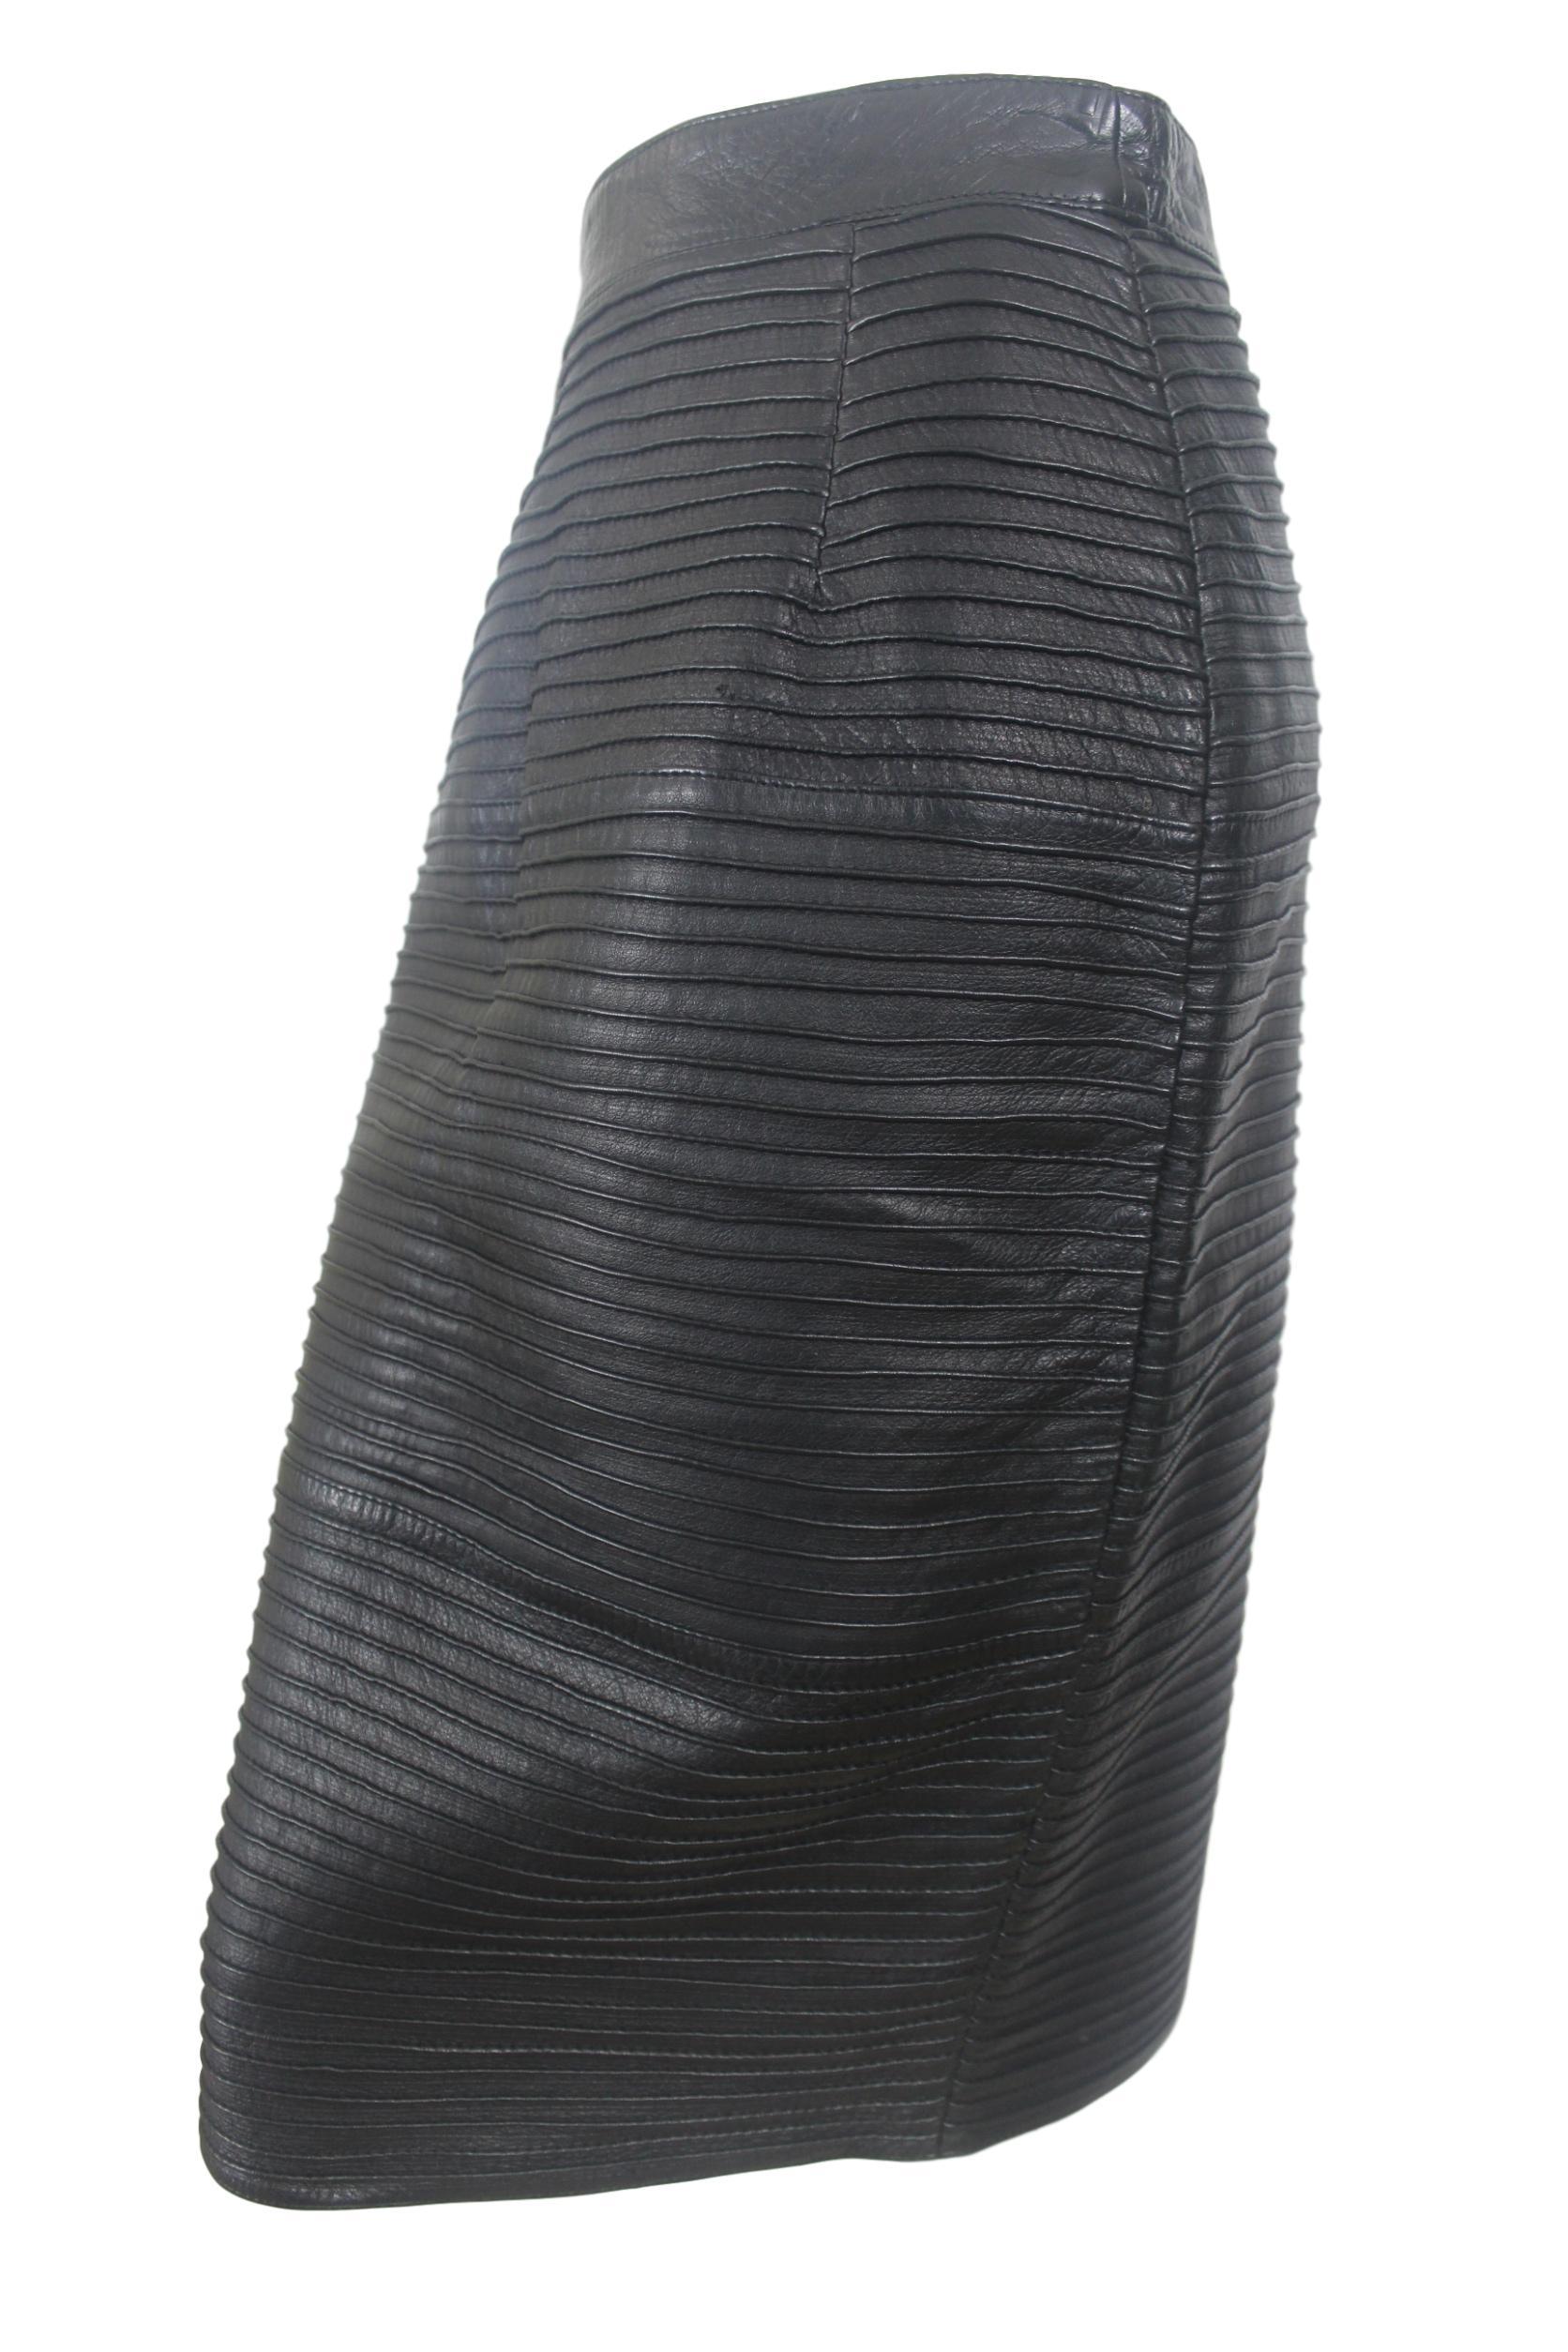 Black Gianni Versace 1990s Leather Skirt For Sale